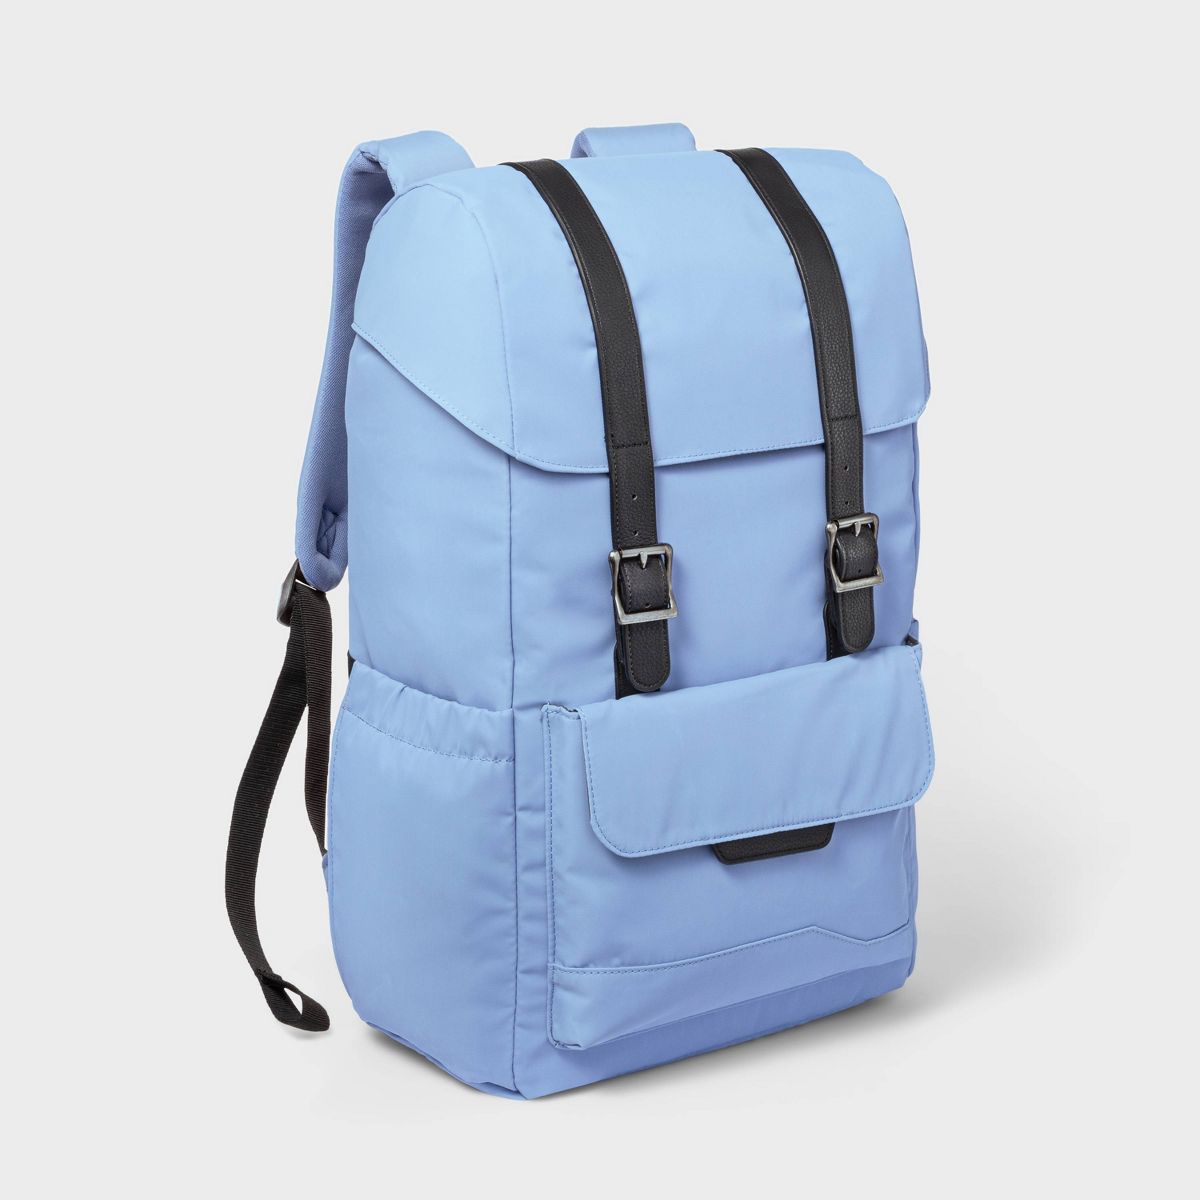 Hot Backpacks Deals w/Free Shipping & Discount Coupons | eDealinfo.com